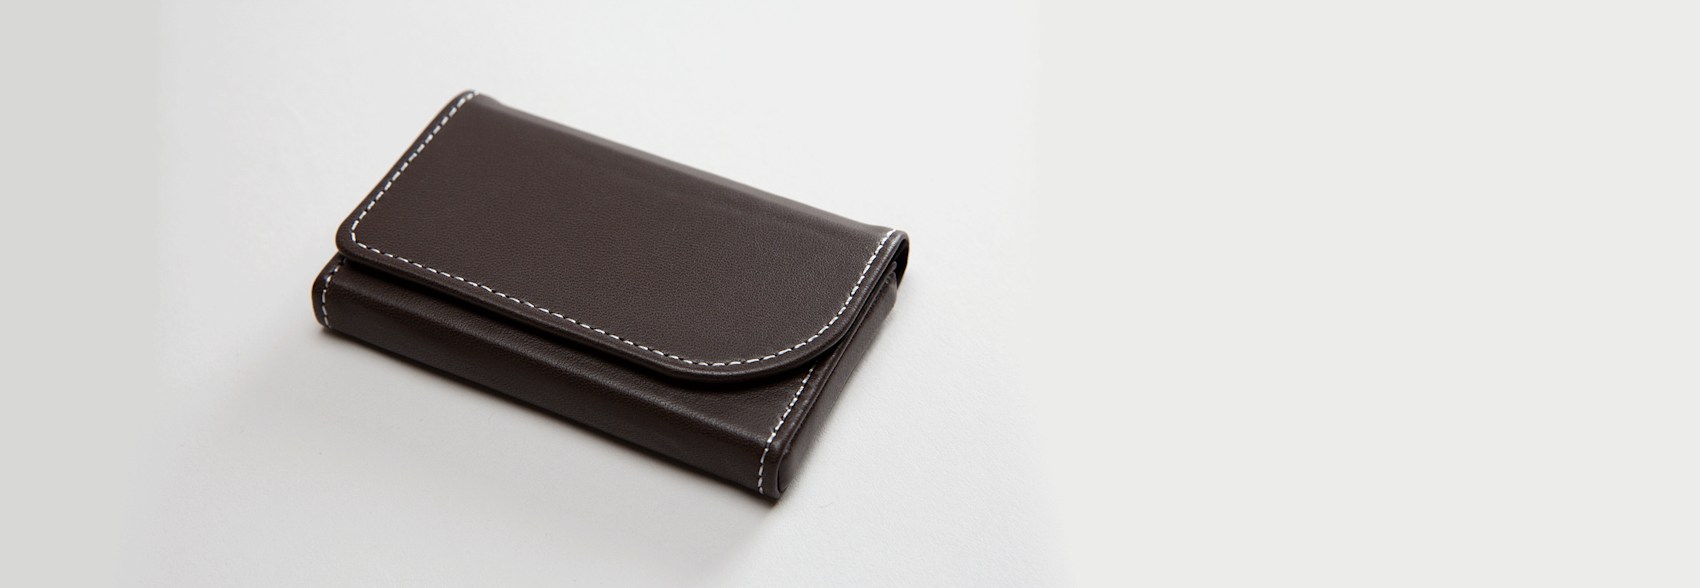 Brown Leather Business Card Holders 3